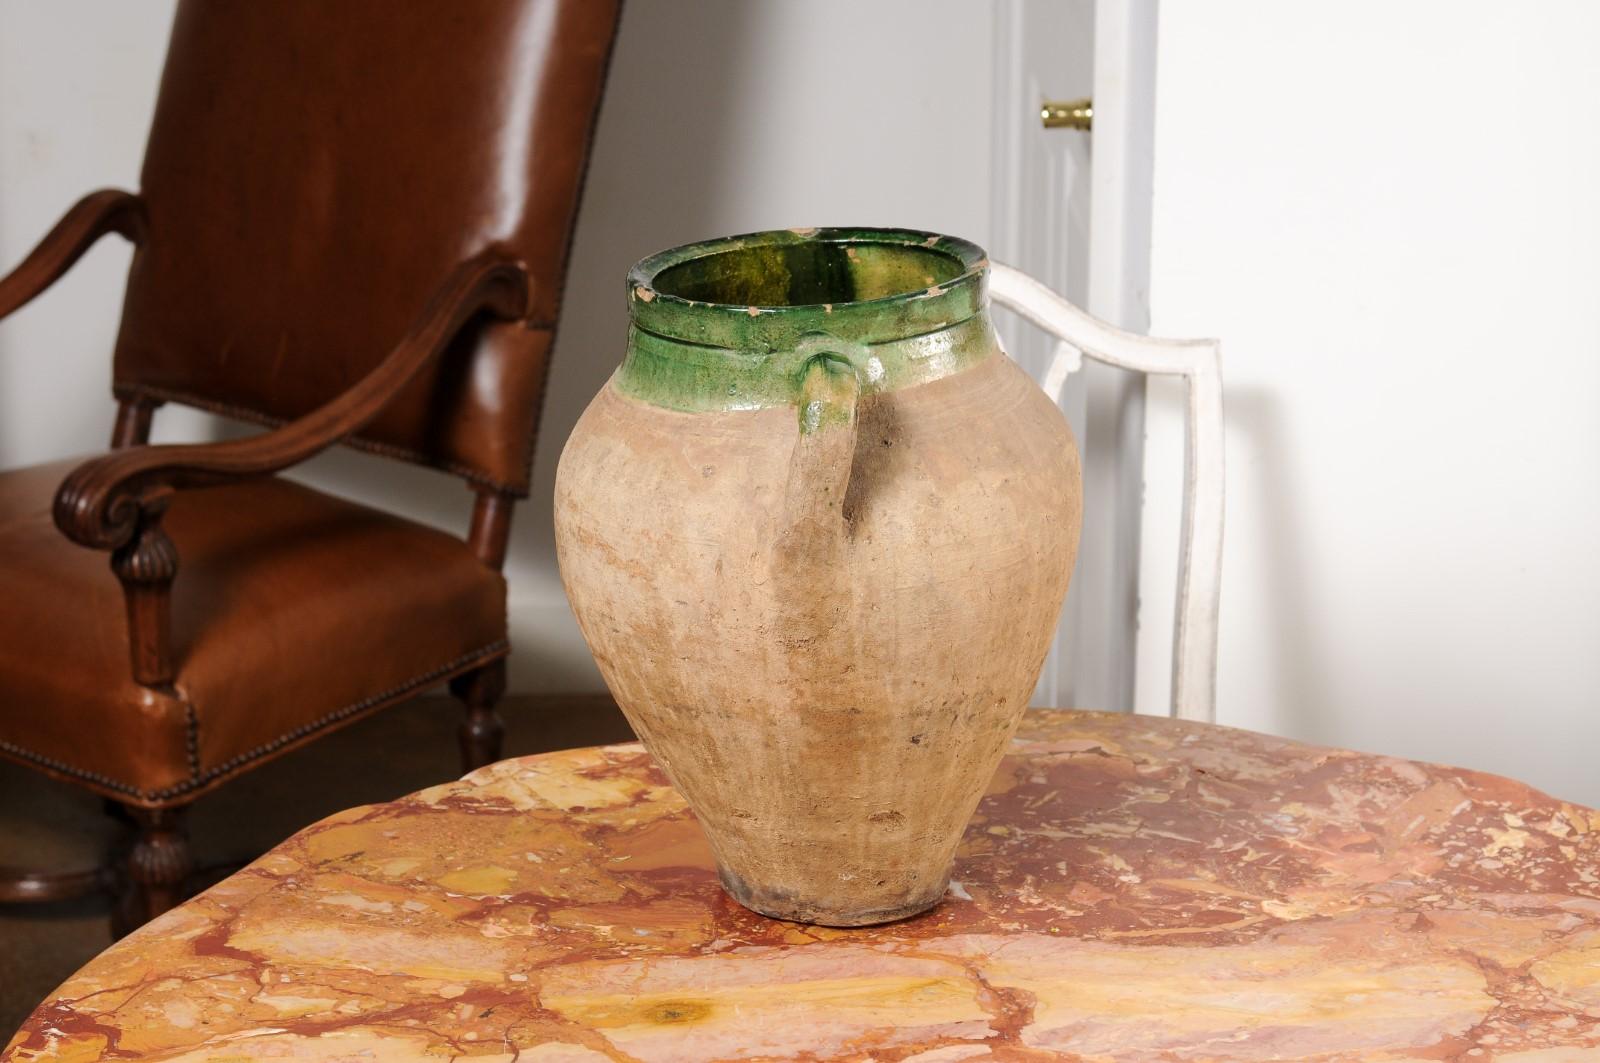 English Rustic 1930s Terracotta Olive Oil Jar Circa 1930 with Green Glazed Top For Sale 2